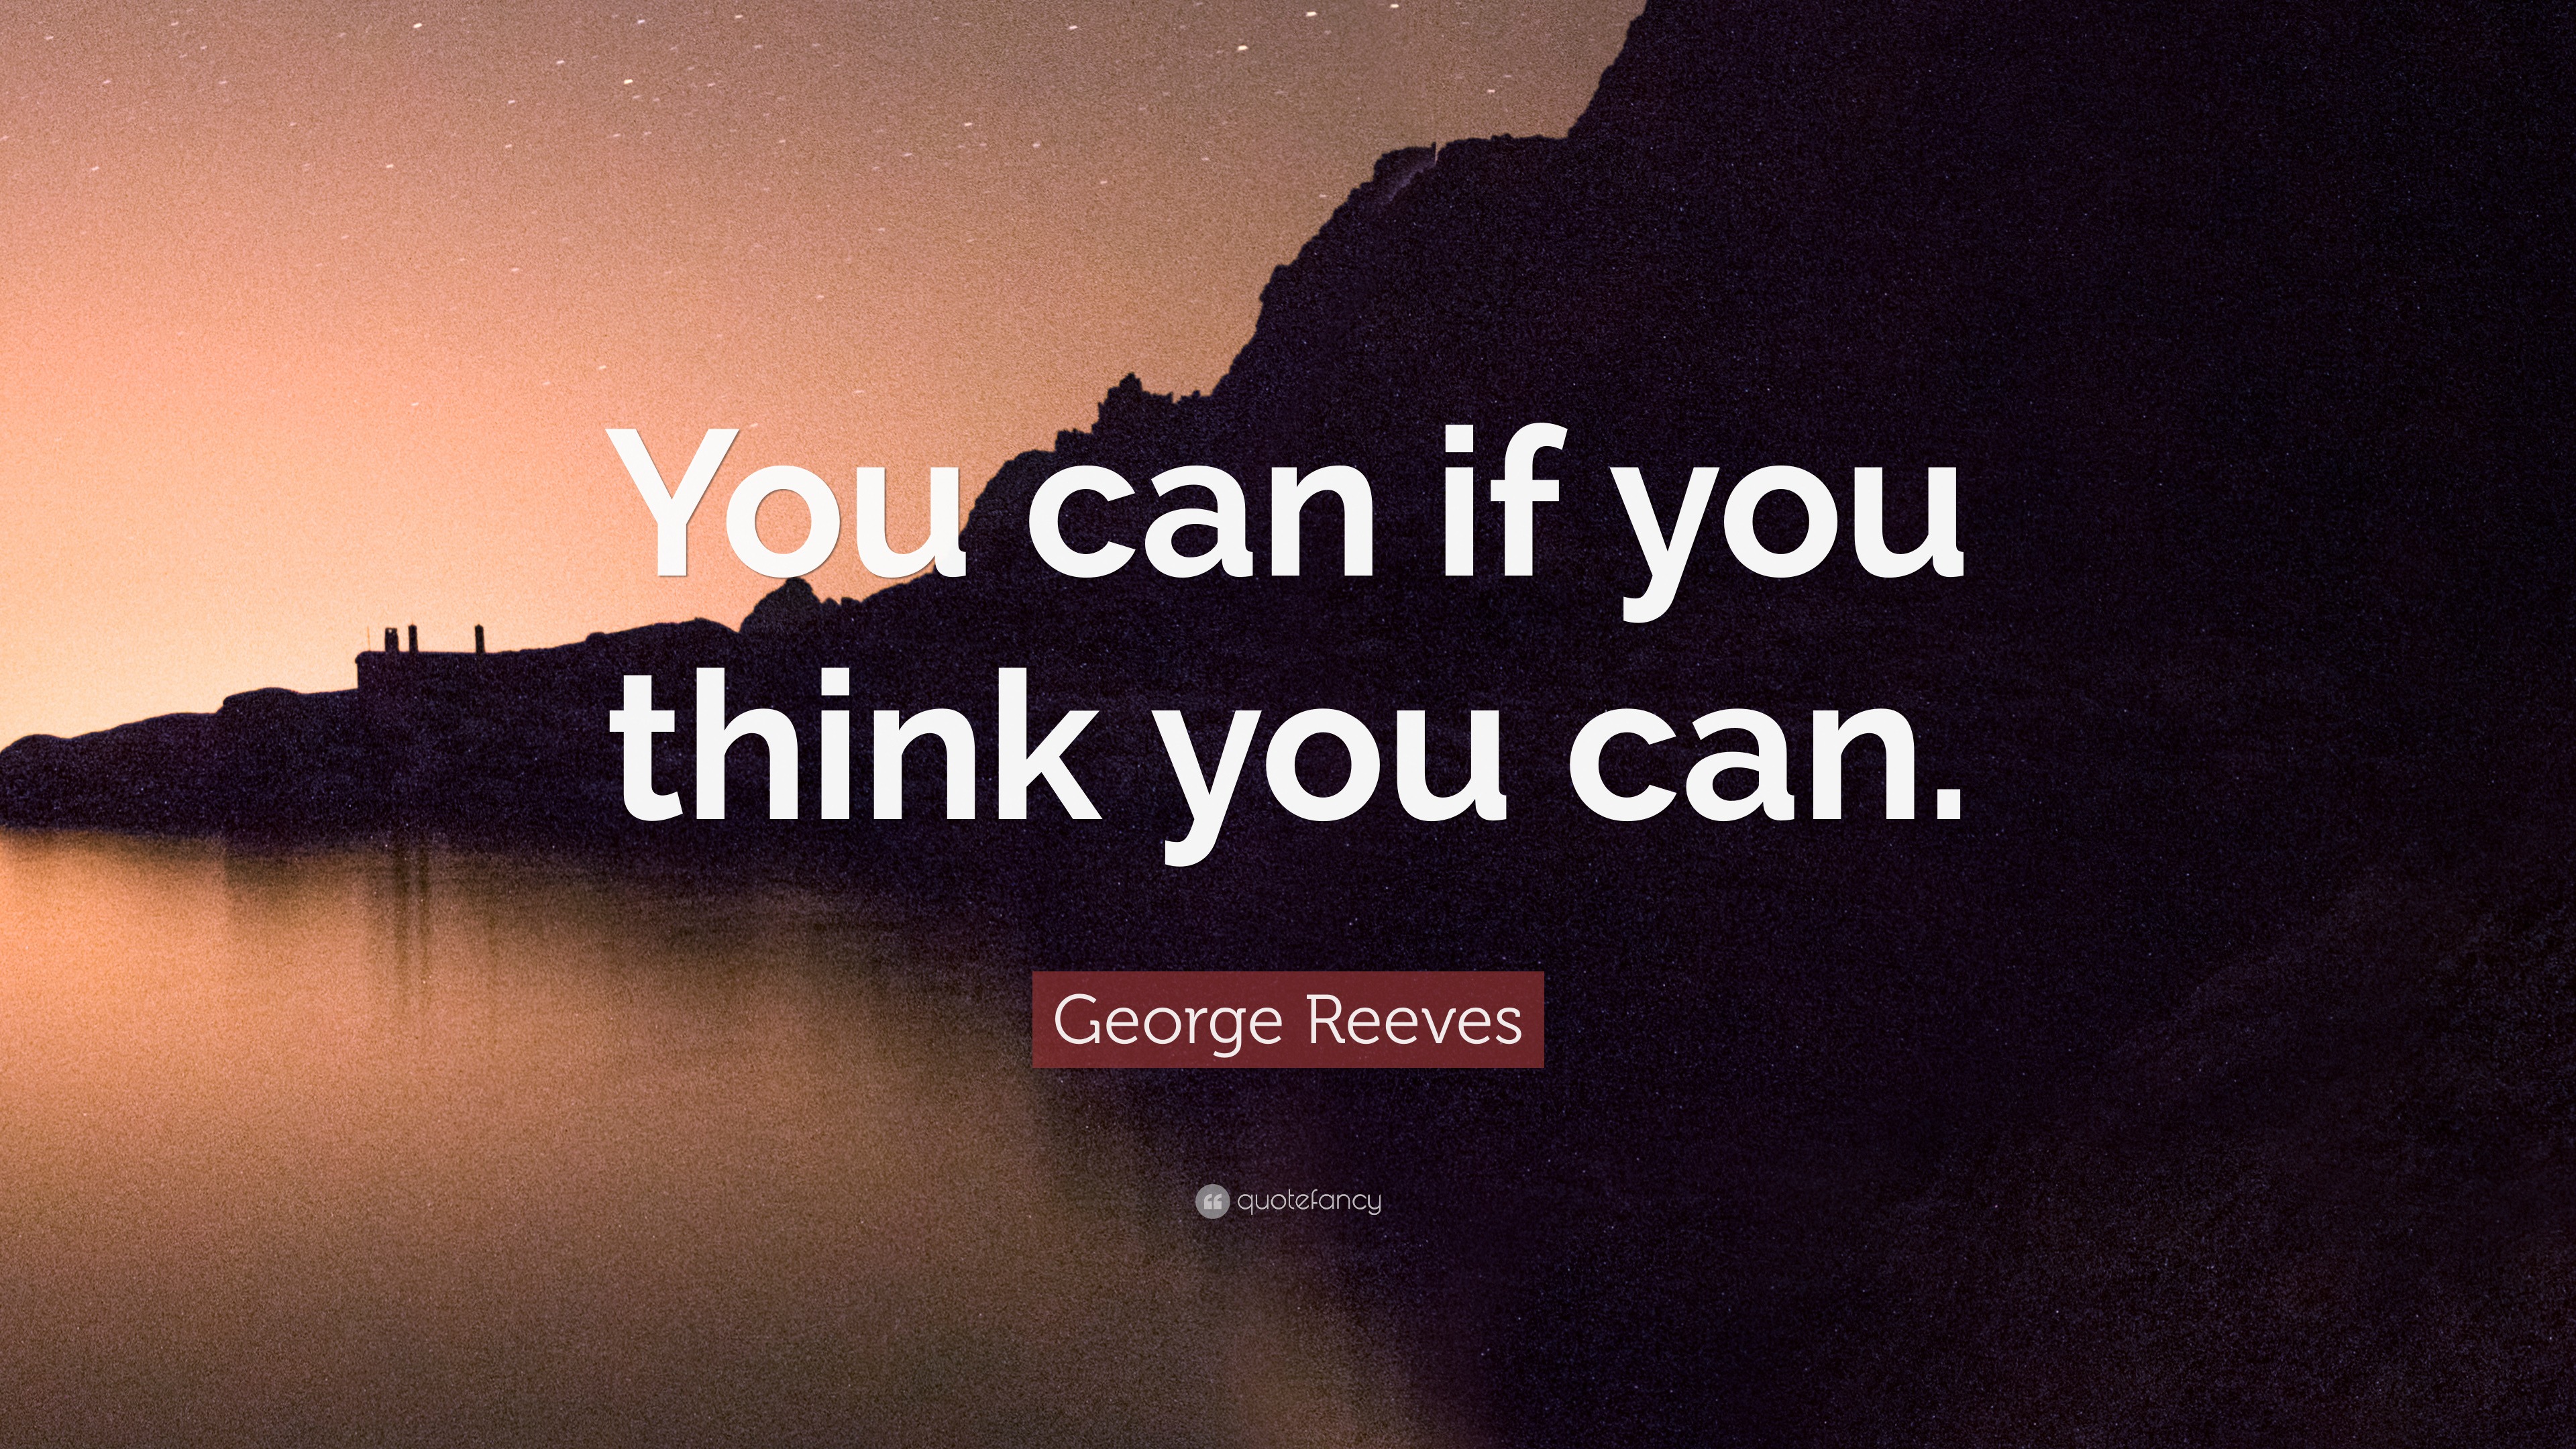 You can if you think you can. – George Reeves Quote 305 - Ave Mateiu